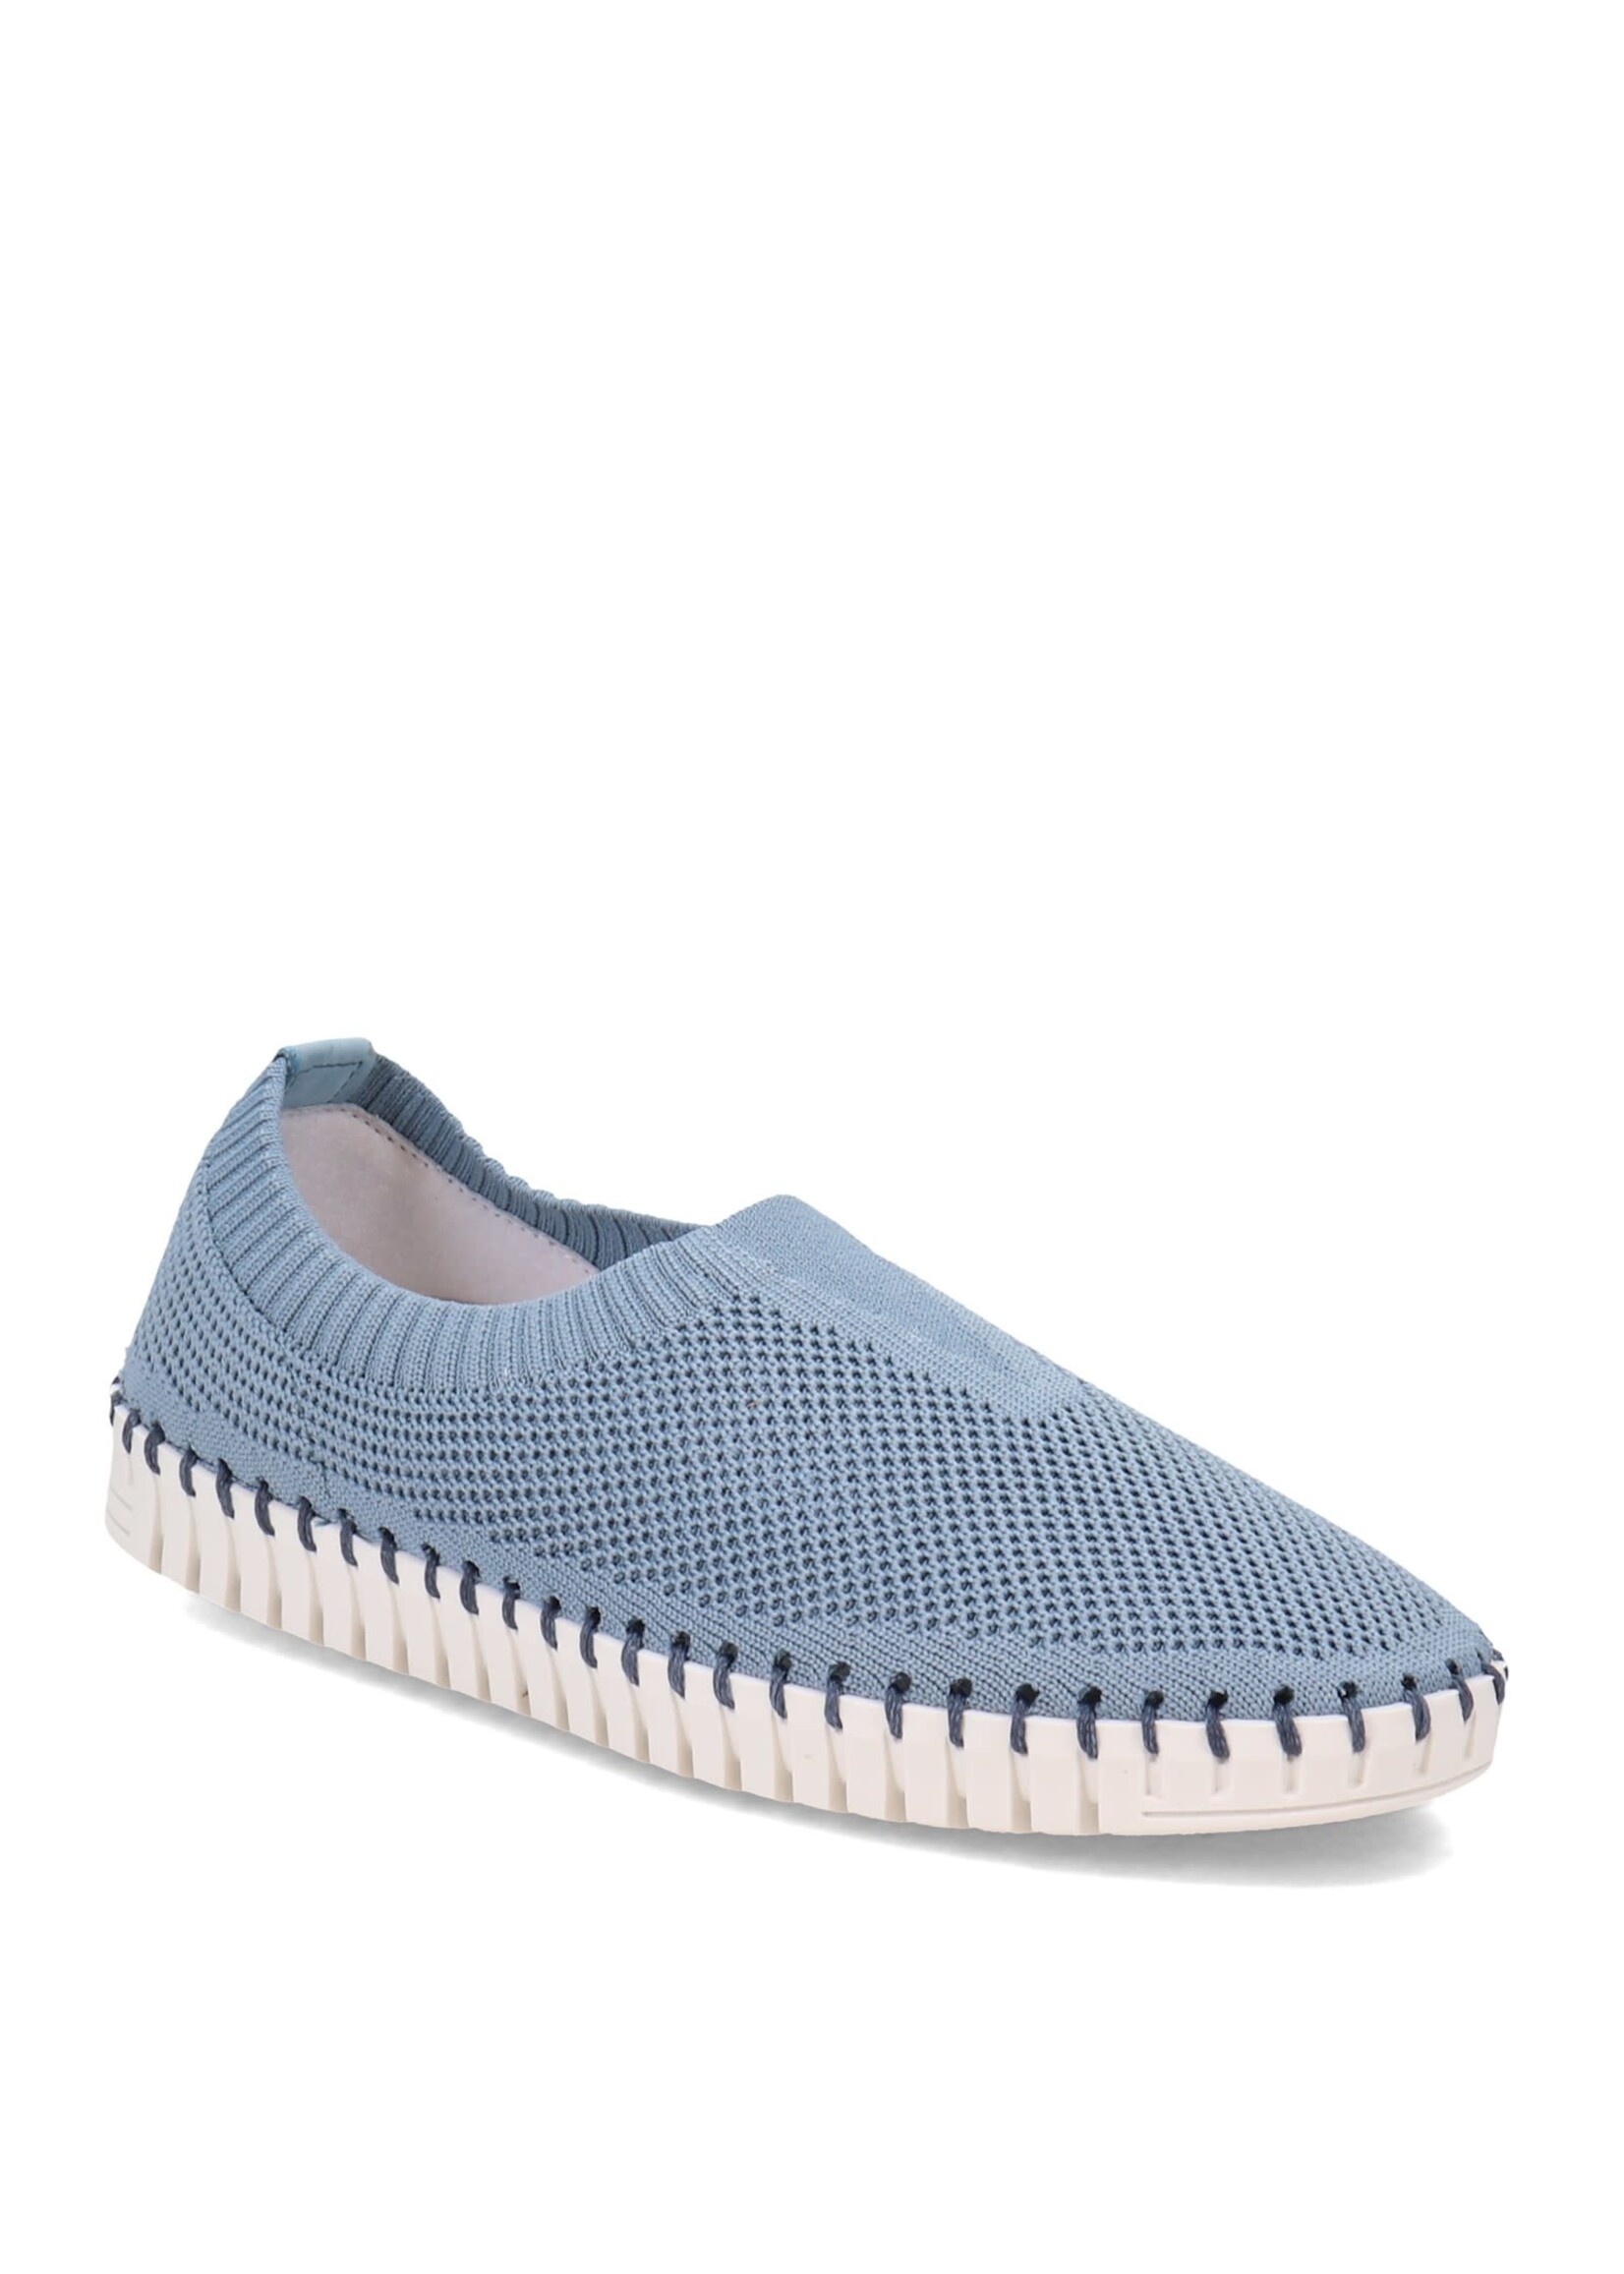 Eric Michael Lucy Powder Blue Slip Ons by Eric Michaels